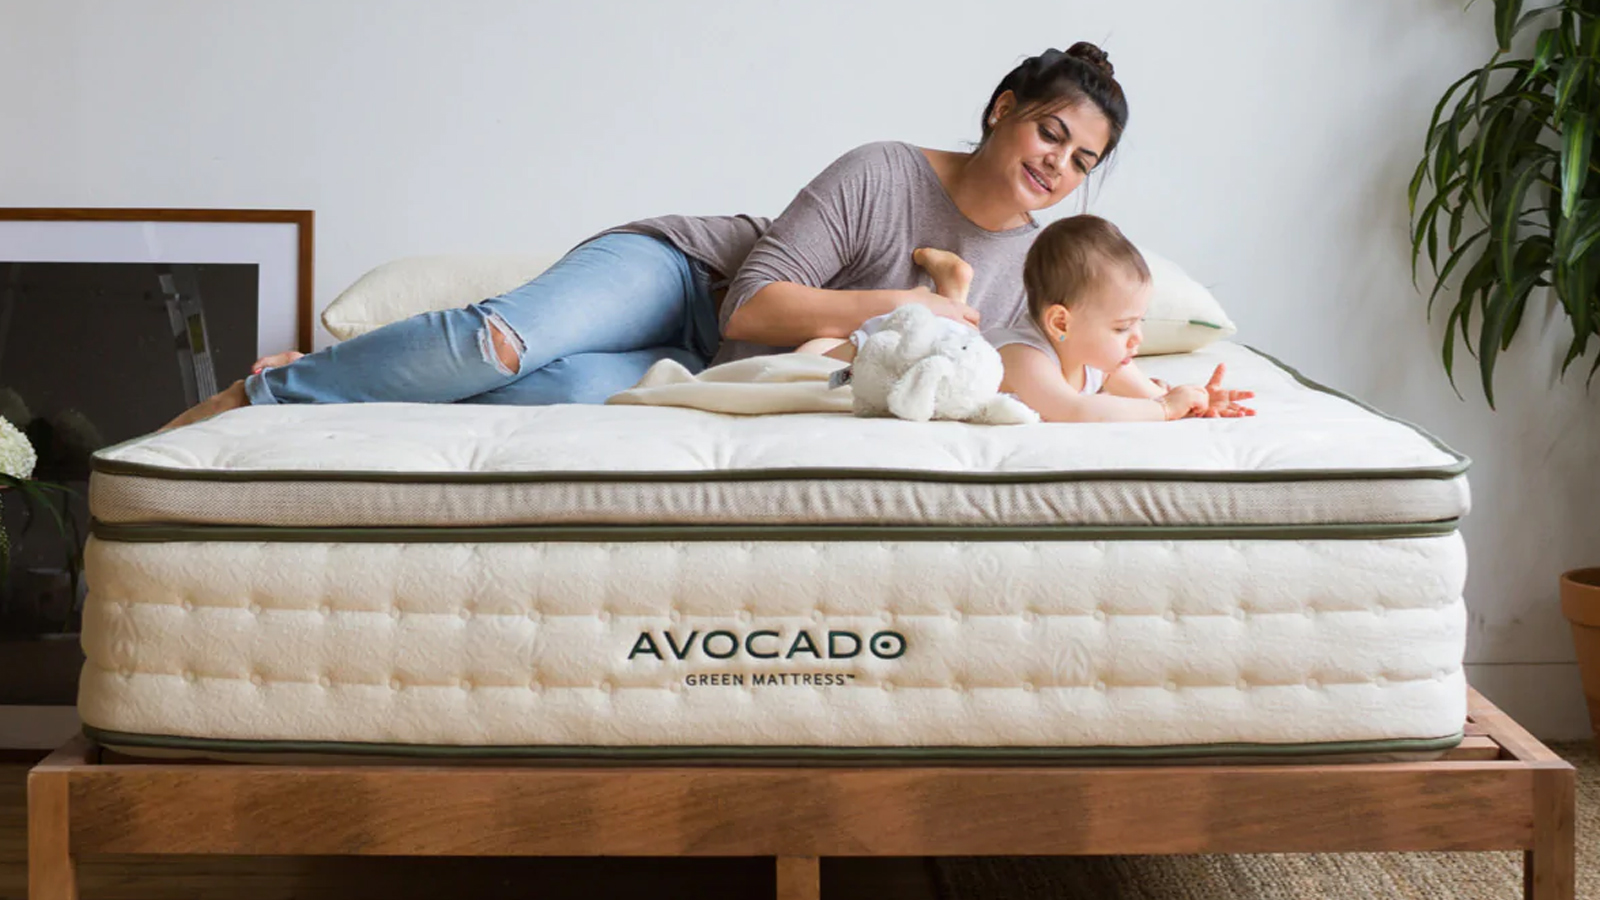 The Avocado Green Mattress, featuring a woman and baby lying on top, is the best organic pillow-top mattress